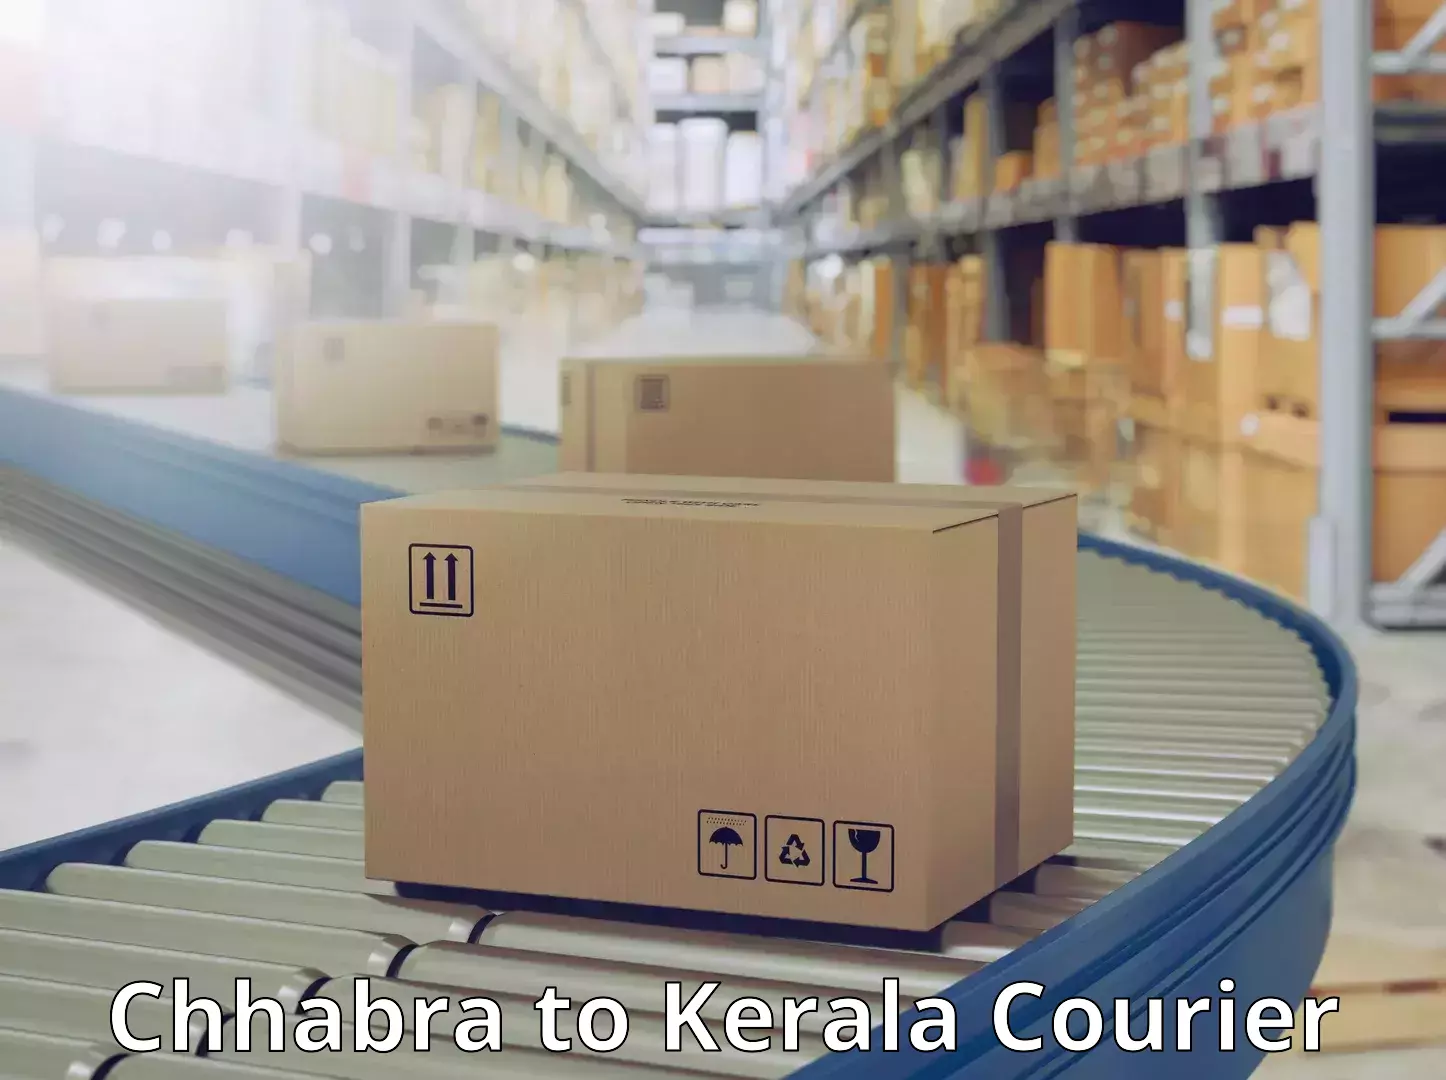 Courier service comparison Chhabra to Puthukkad